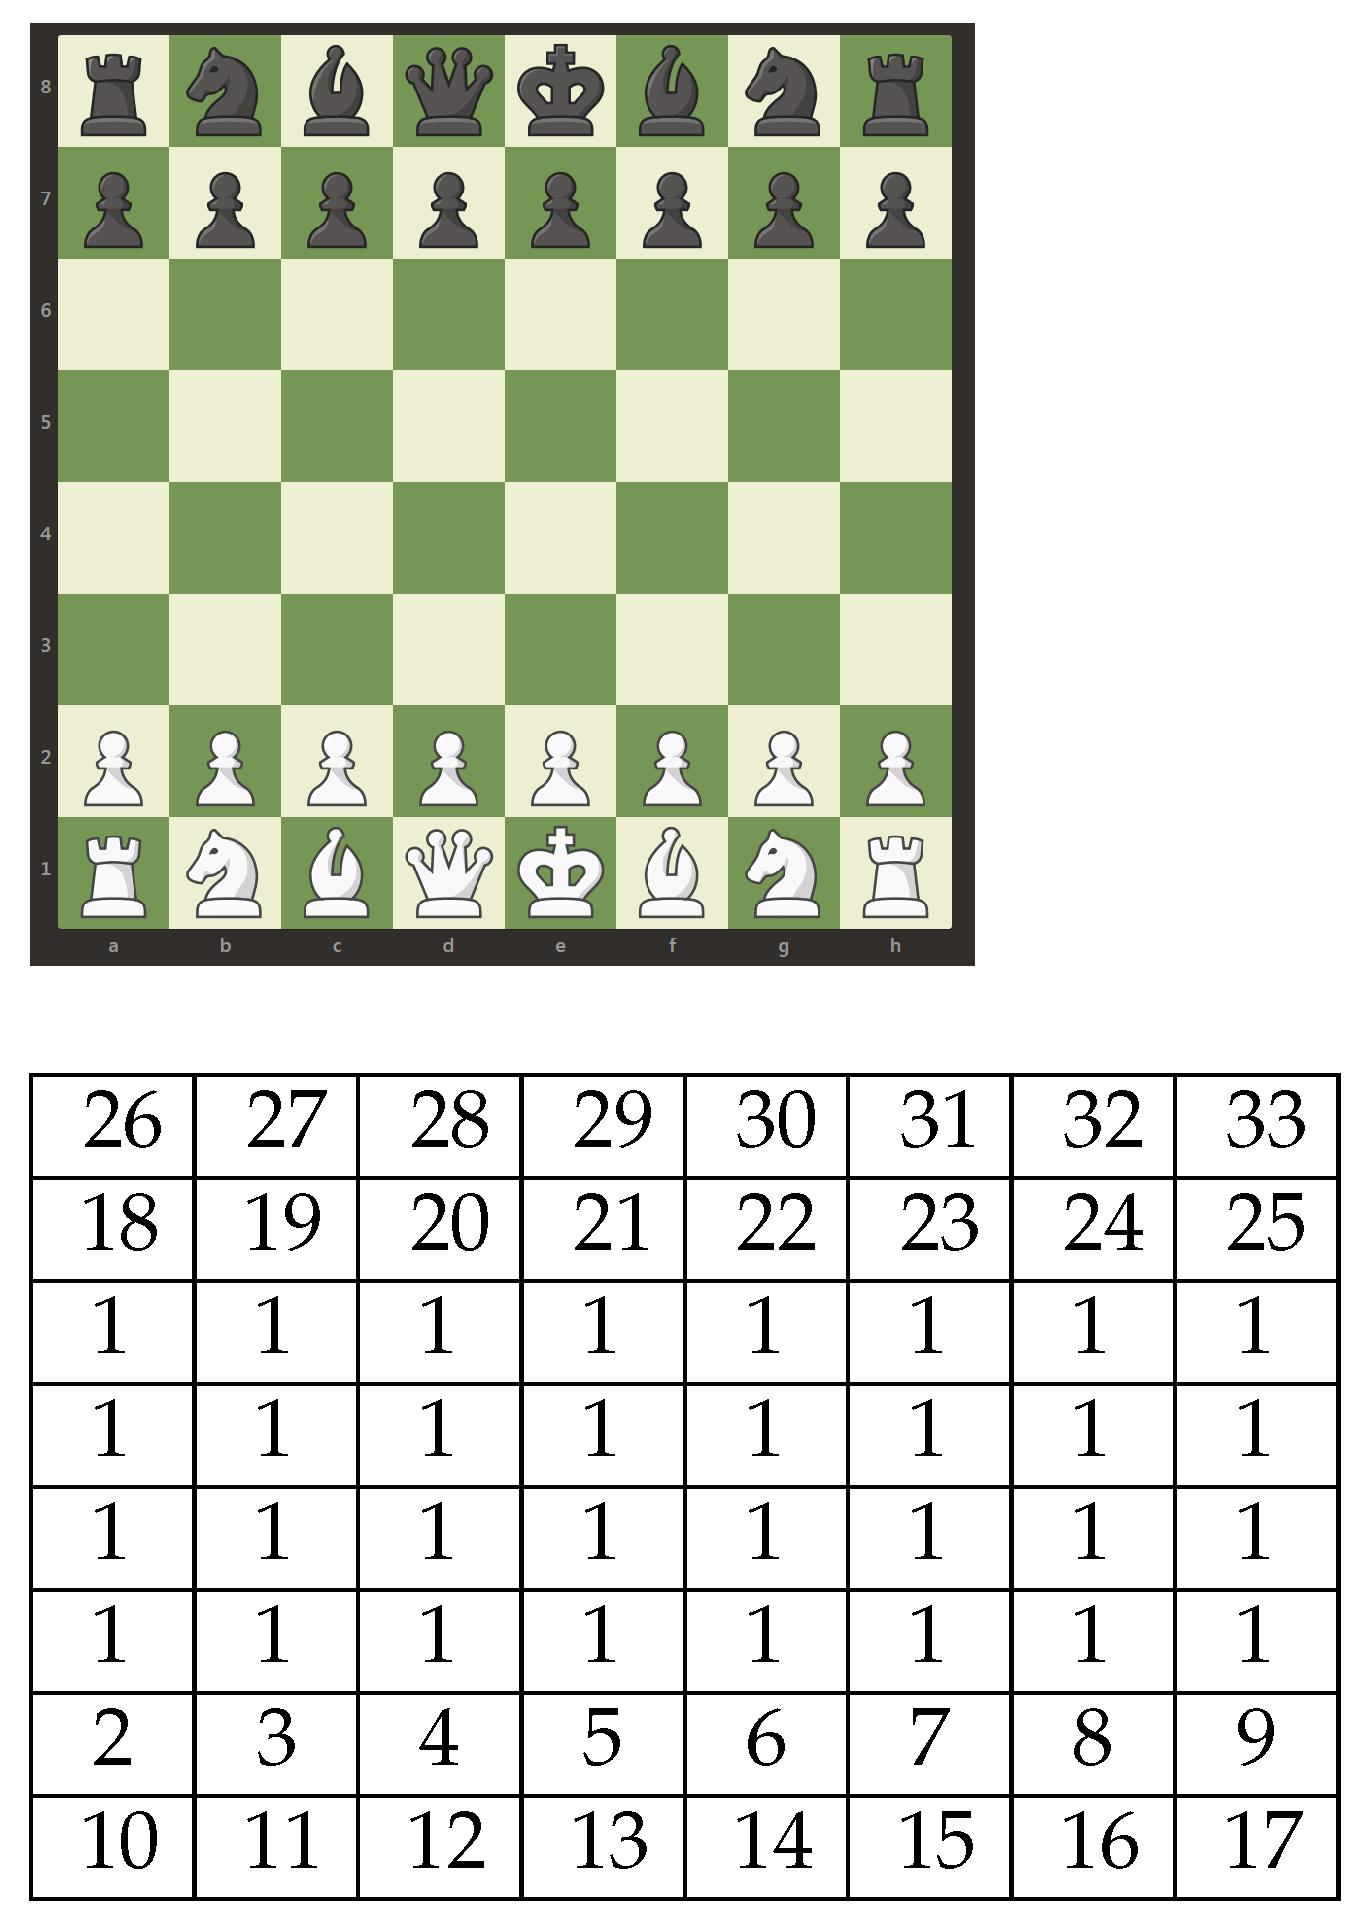 The enormous and rather constant progress of human chess corresponds to